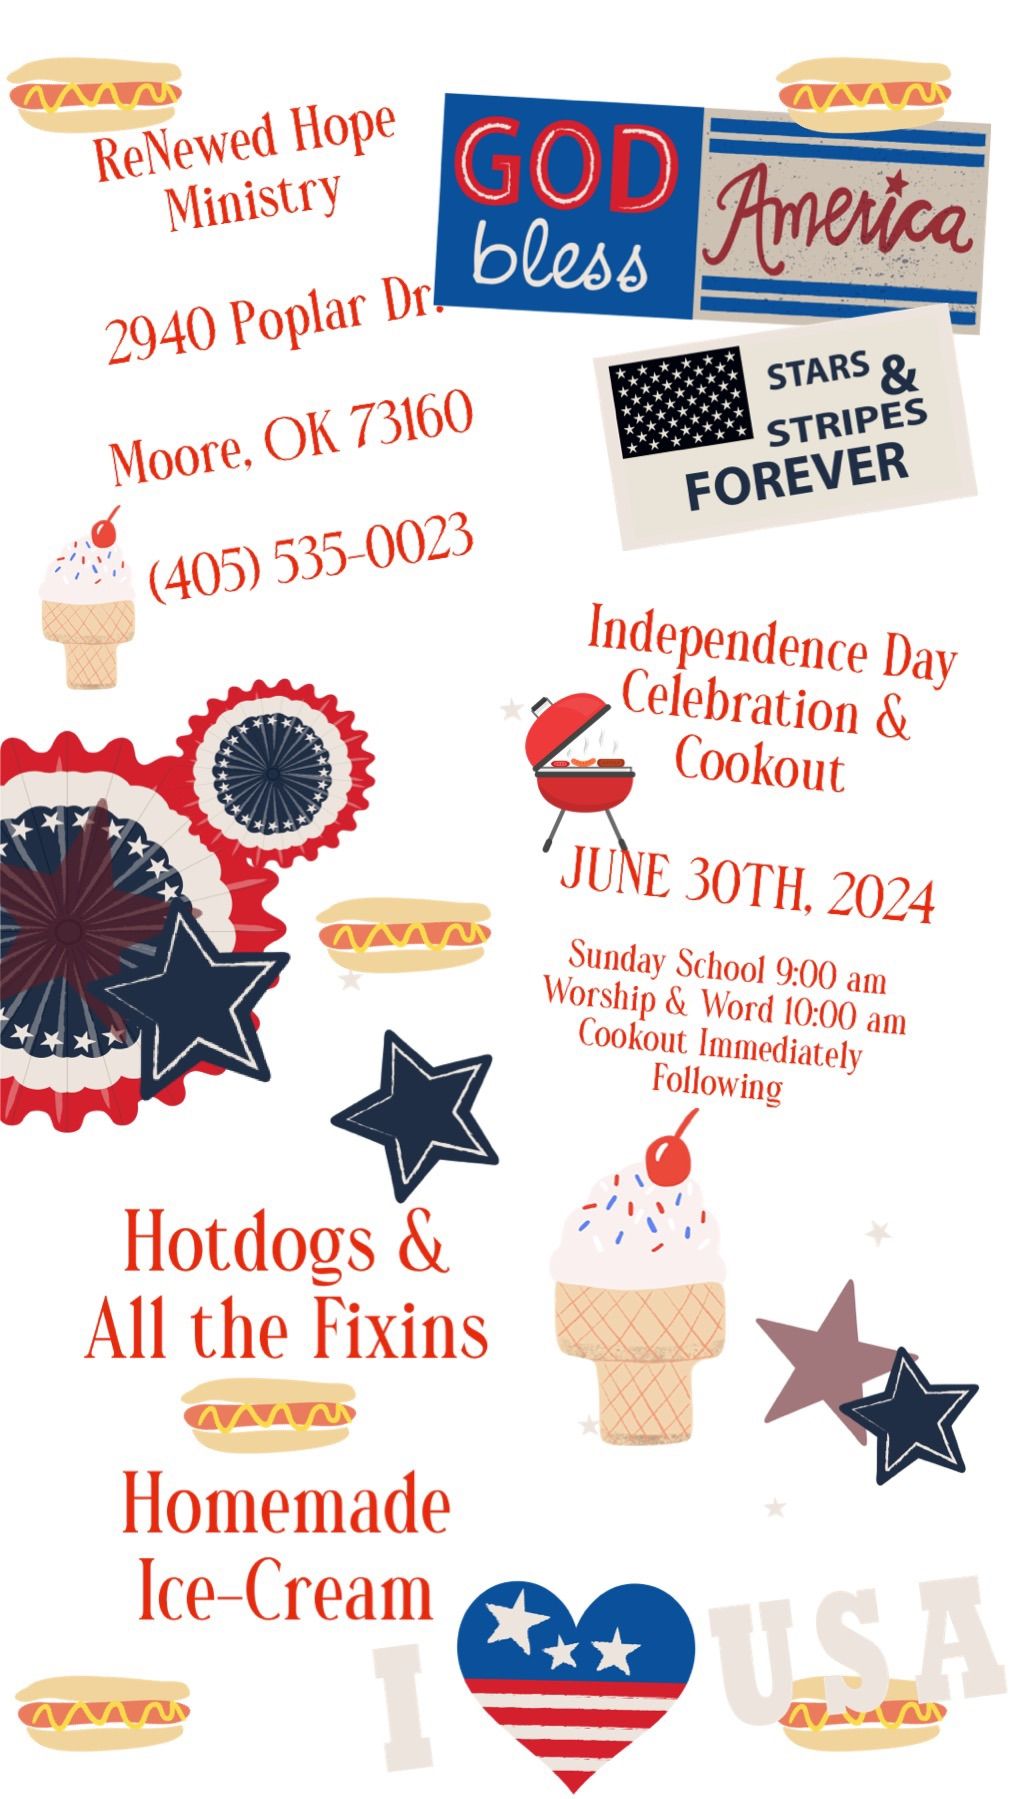 Independence Day Celebration Service and Cookout